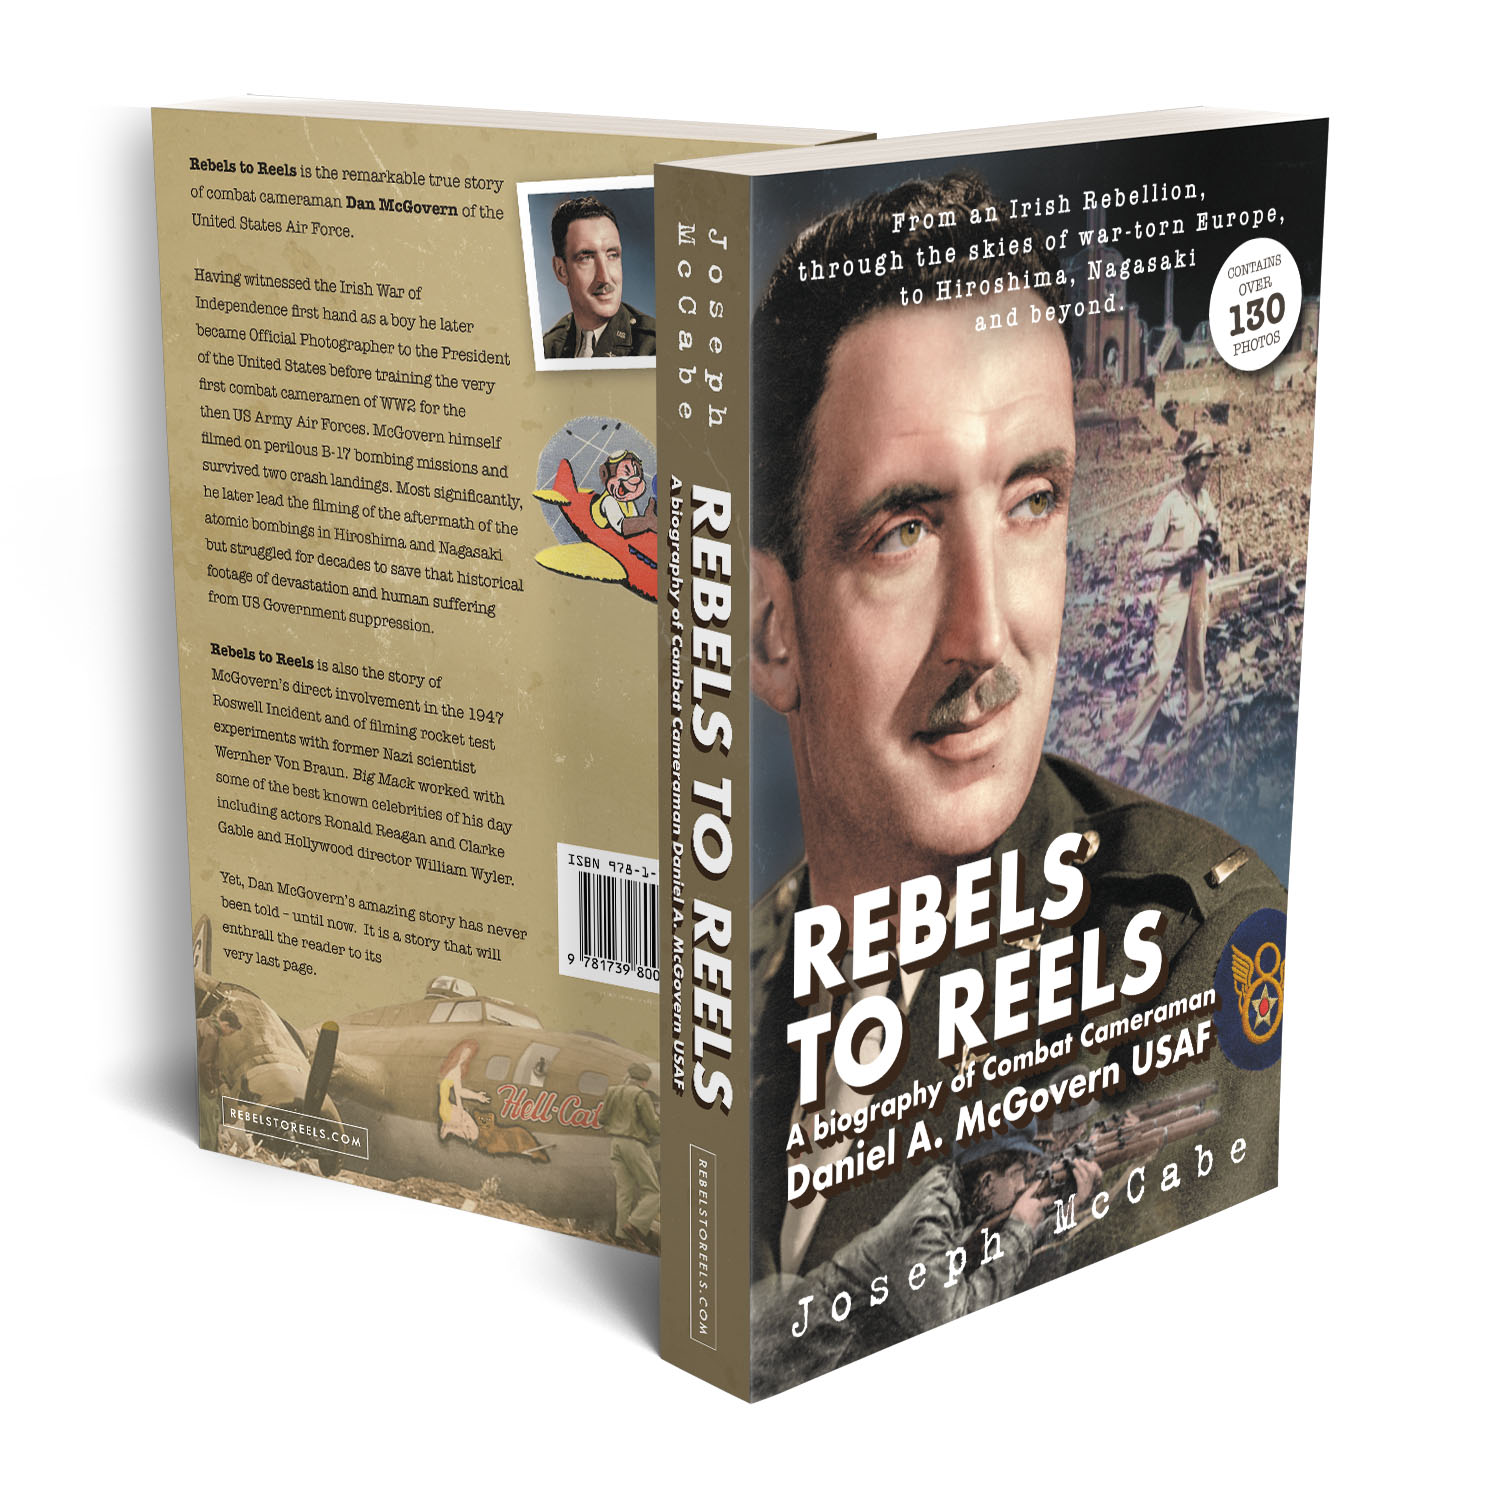 'Rebels to Reels' is the incredible, historic true-life story of combat cameraman Lt Col. Daniel A. McGovern USAF. The author is Joe McCabe. The book cover was designed by Mark Thomas of coverness.com. To find out more about my book design services, please visit www.coverness.com